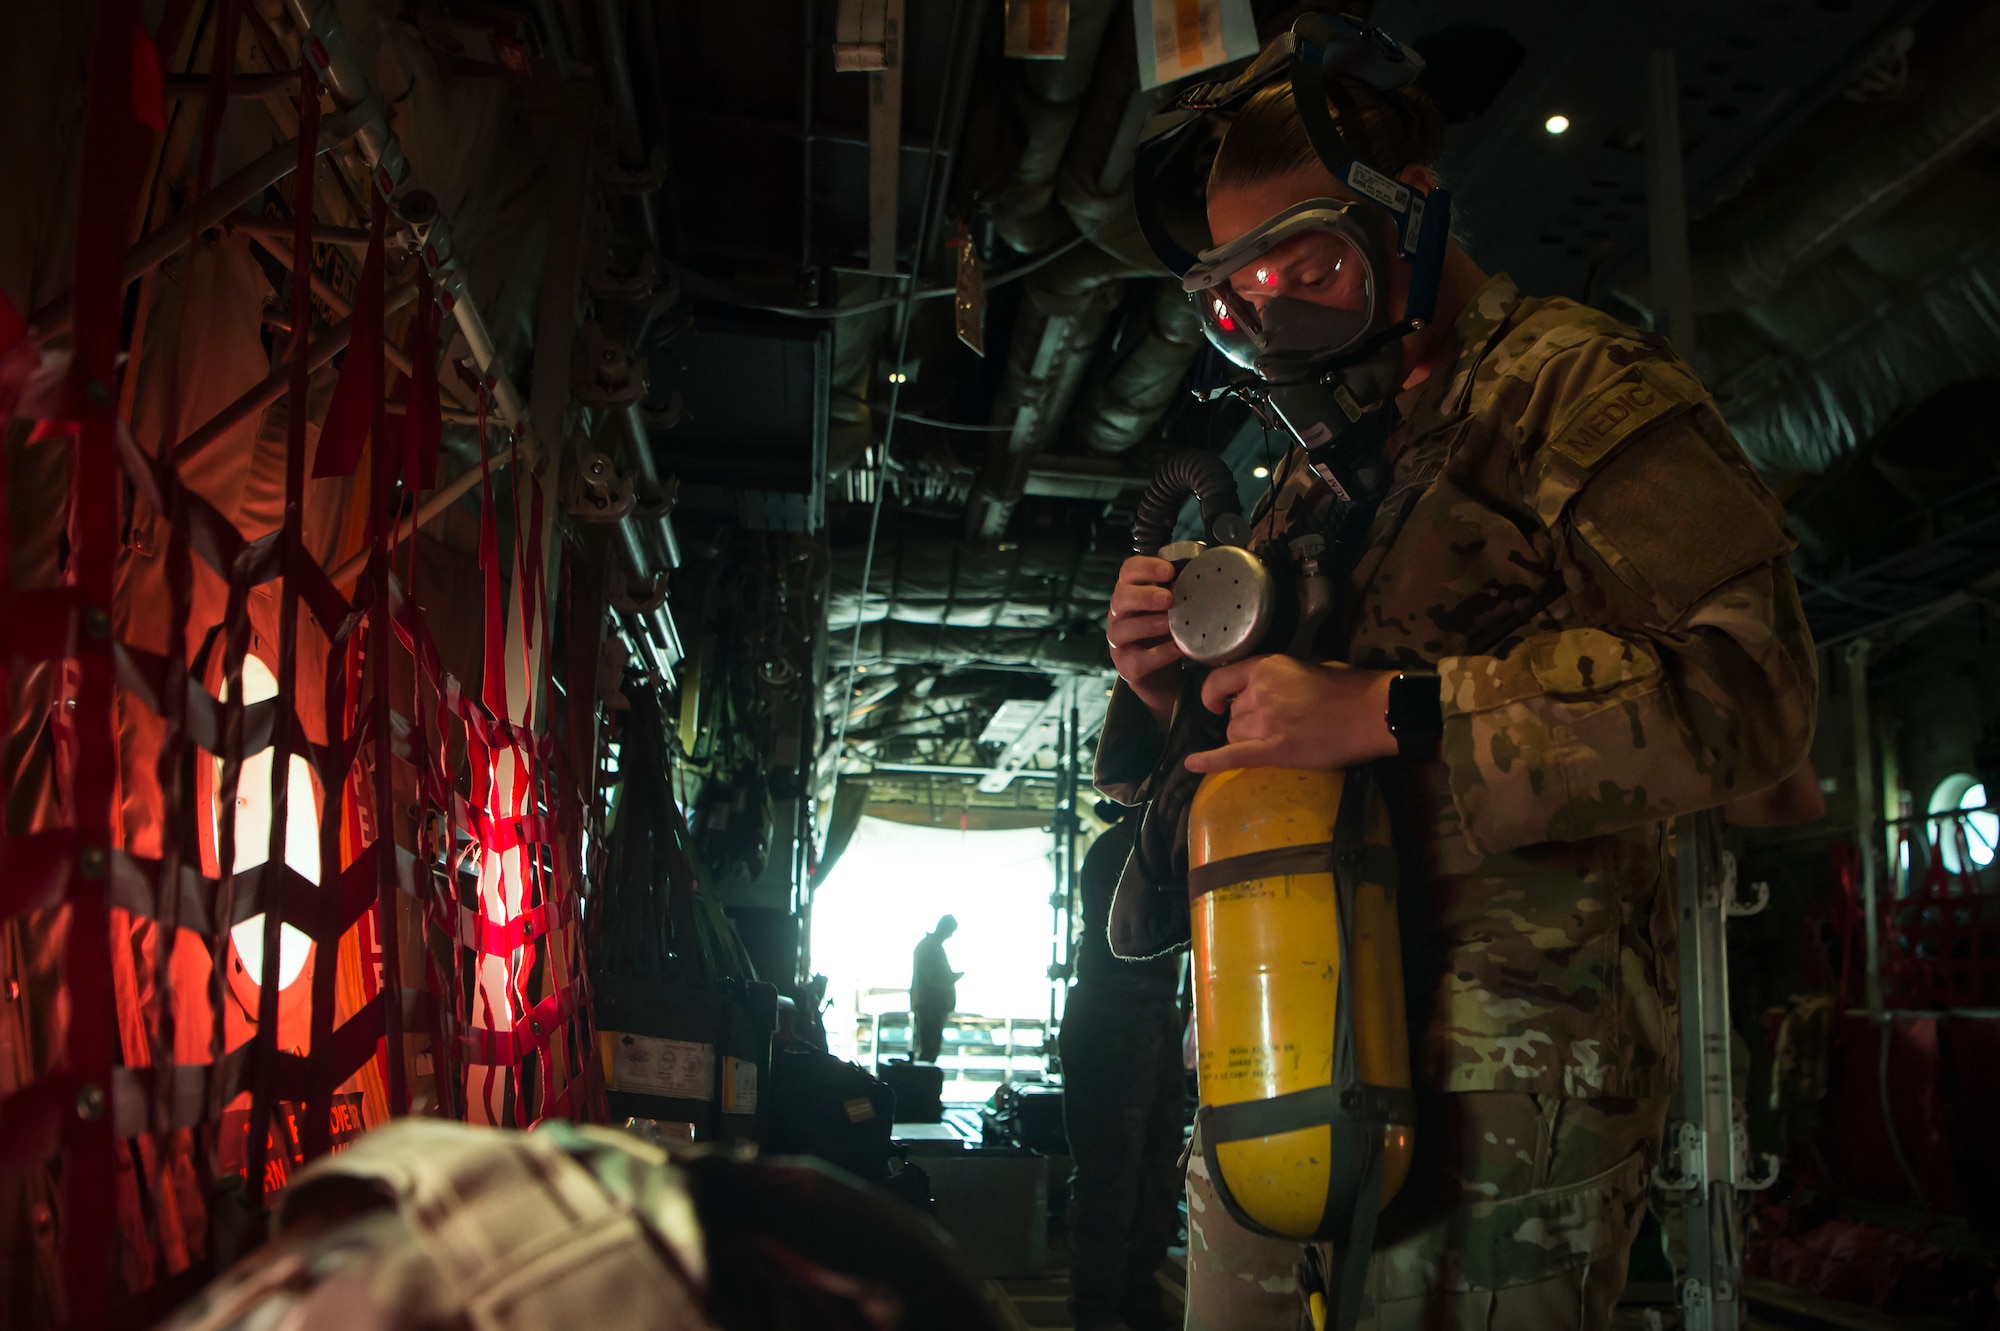 Staff Sgt. Lyndsey Glotfelty, 379th Expeditionary Aeromedical Evacuation Squadron (EAES) aeromedical evacuation technician, ensures medical equipment is operational on a C-130 Hercules at Al Udeid Air Base, Qatar, prior to a recent mission.